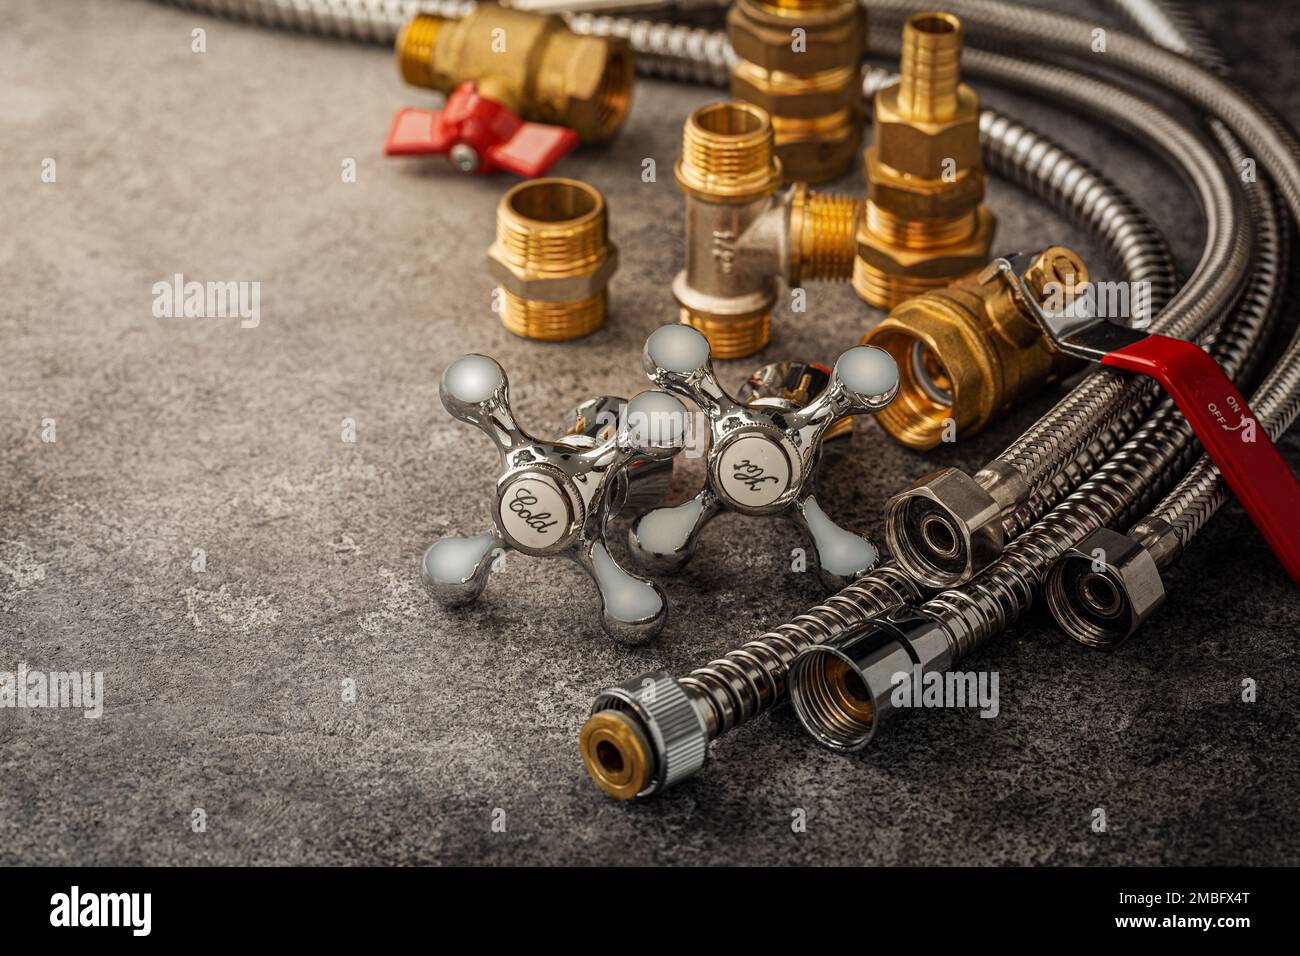 Bathroom Flexible Hoses Pipes And Brass Pipe Fixtures Fittings On Dark Background Stock Photo